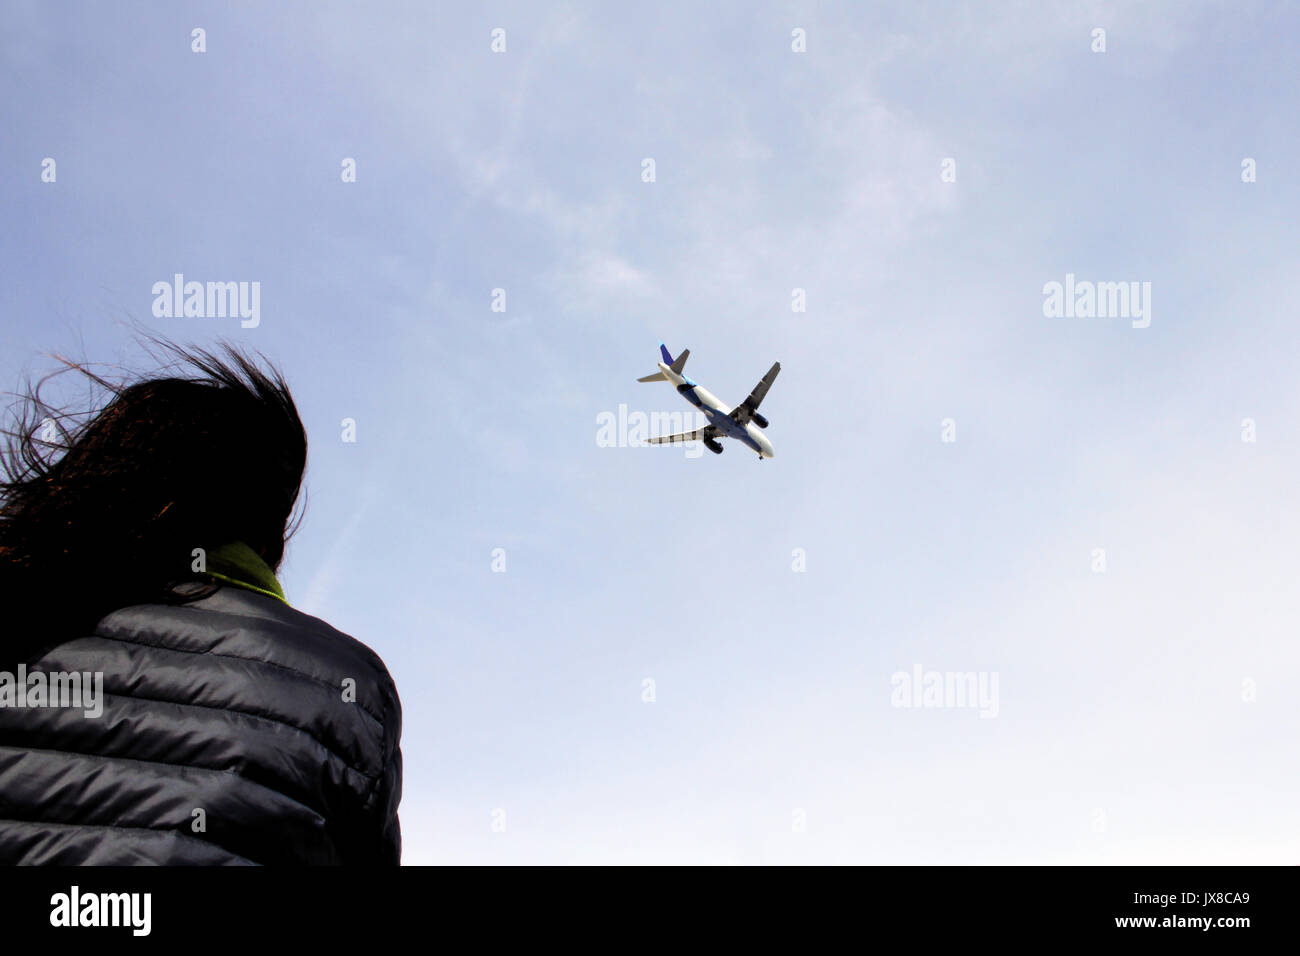 A young woman with dark hair looks up at an airplane as it comes in for a landing. Stock Photo